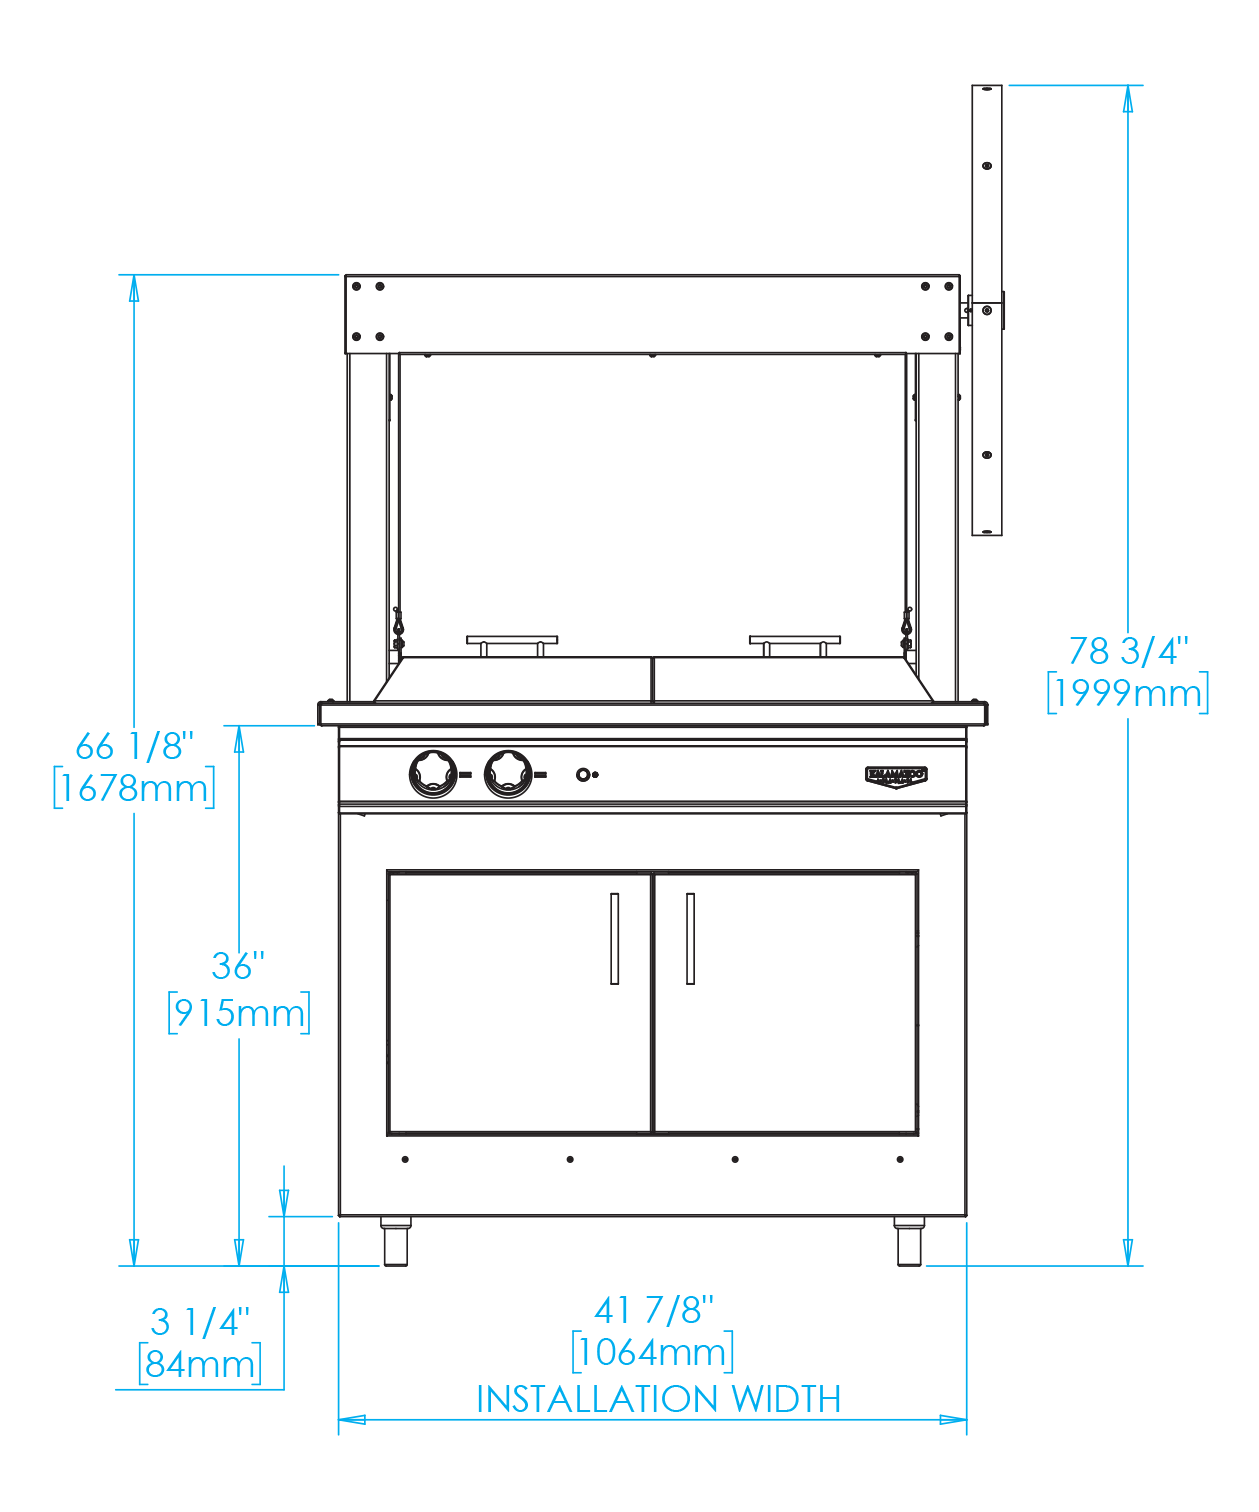 K750GB Built-in Gaucho Grill Dimensions Image